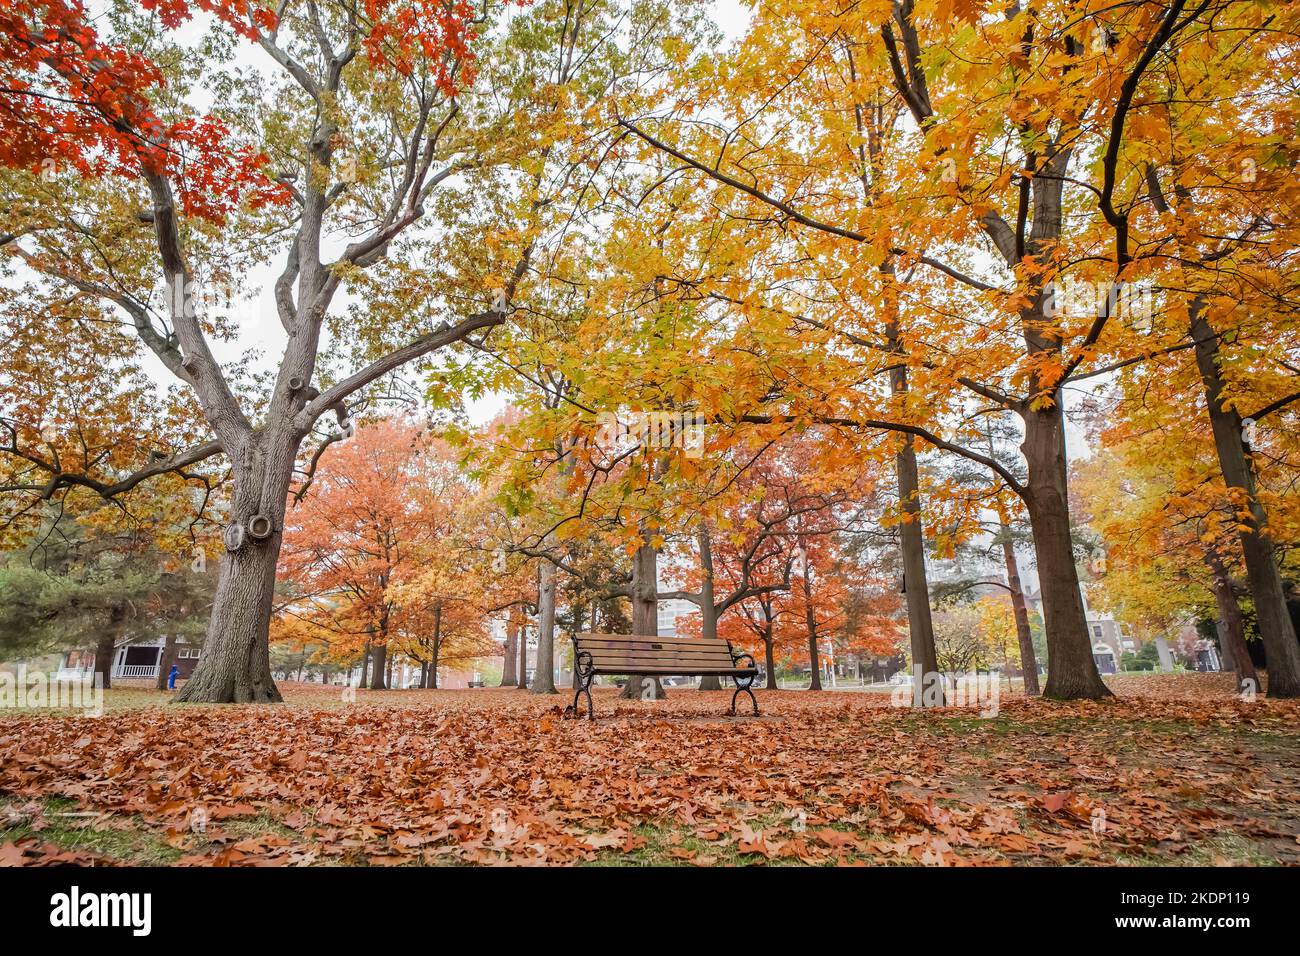 An empty bench inside a park surrounded by yellow orange red tree leaves during fall seasion in north american usa or canada Stock Photo